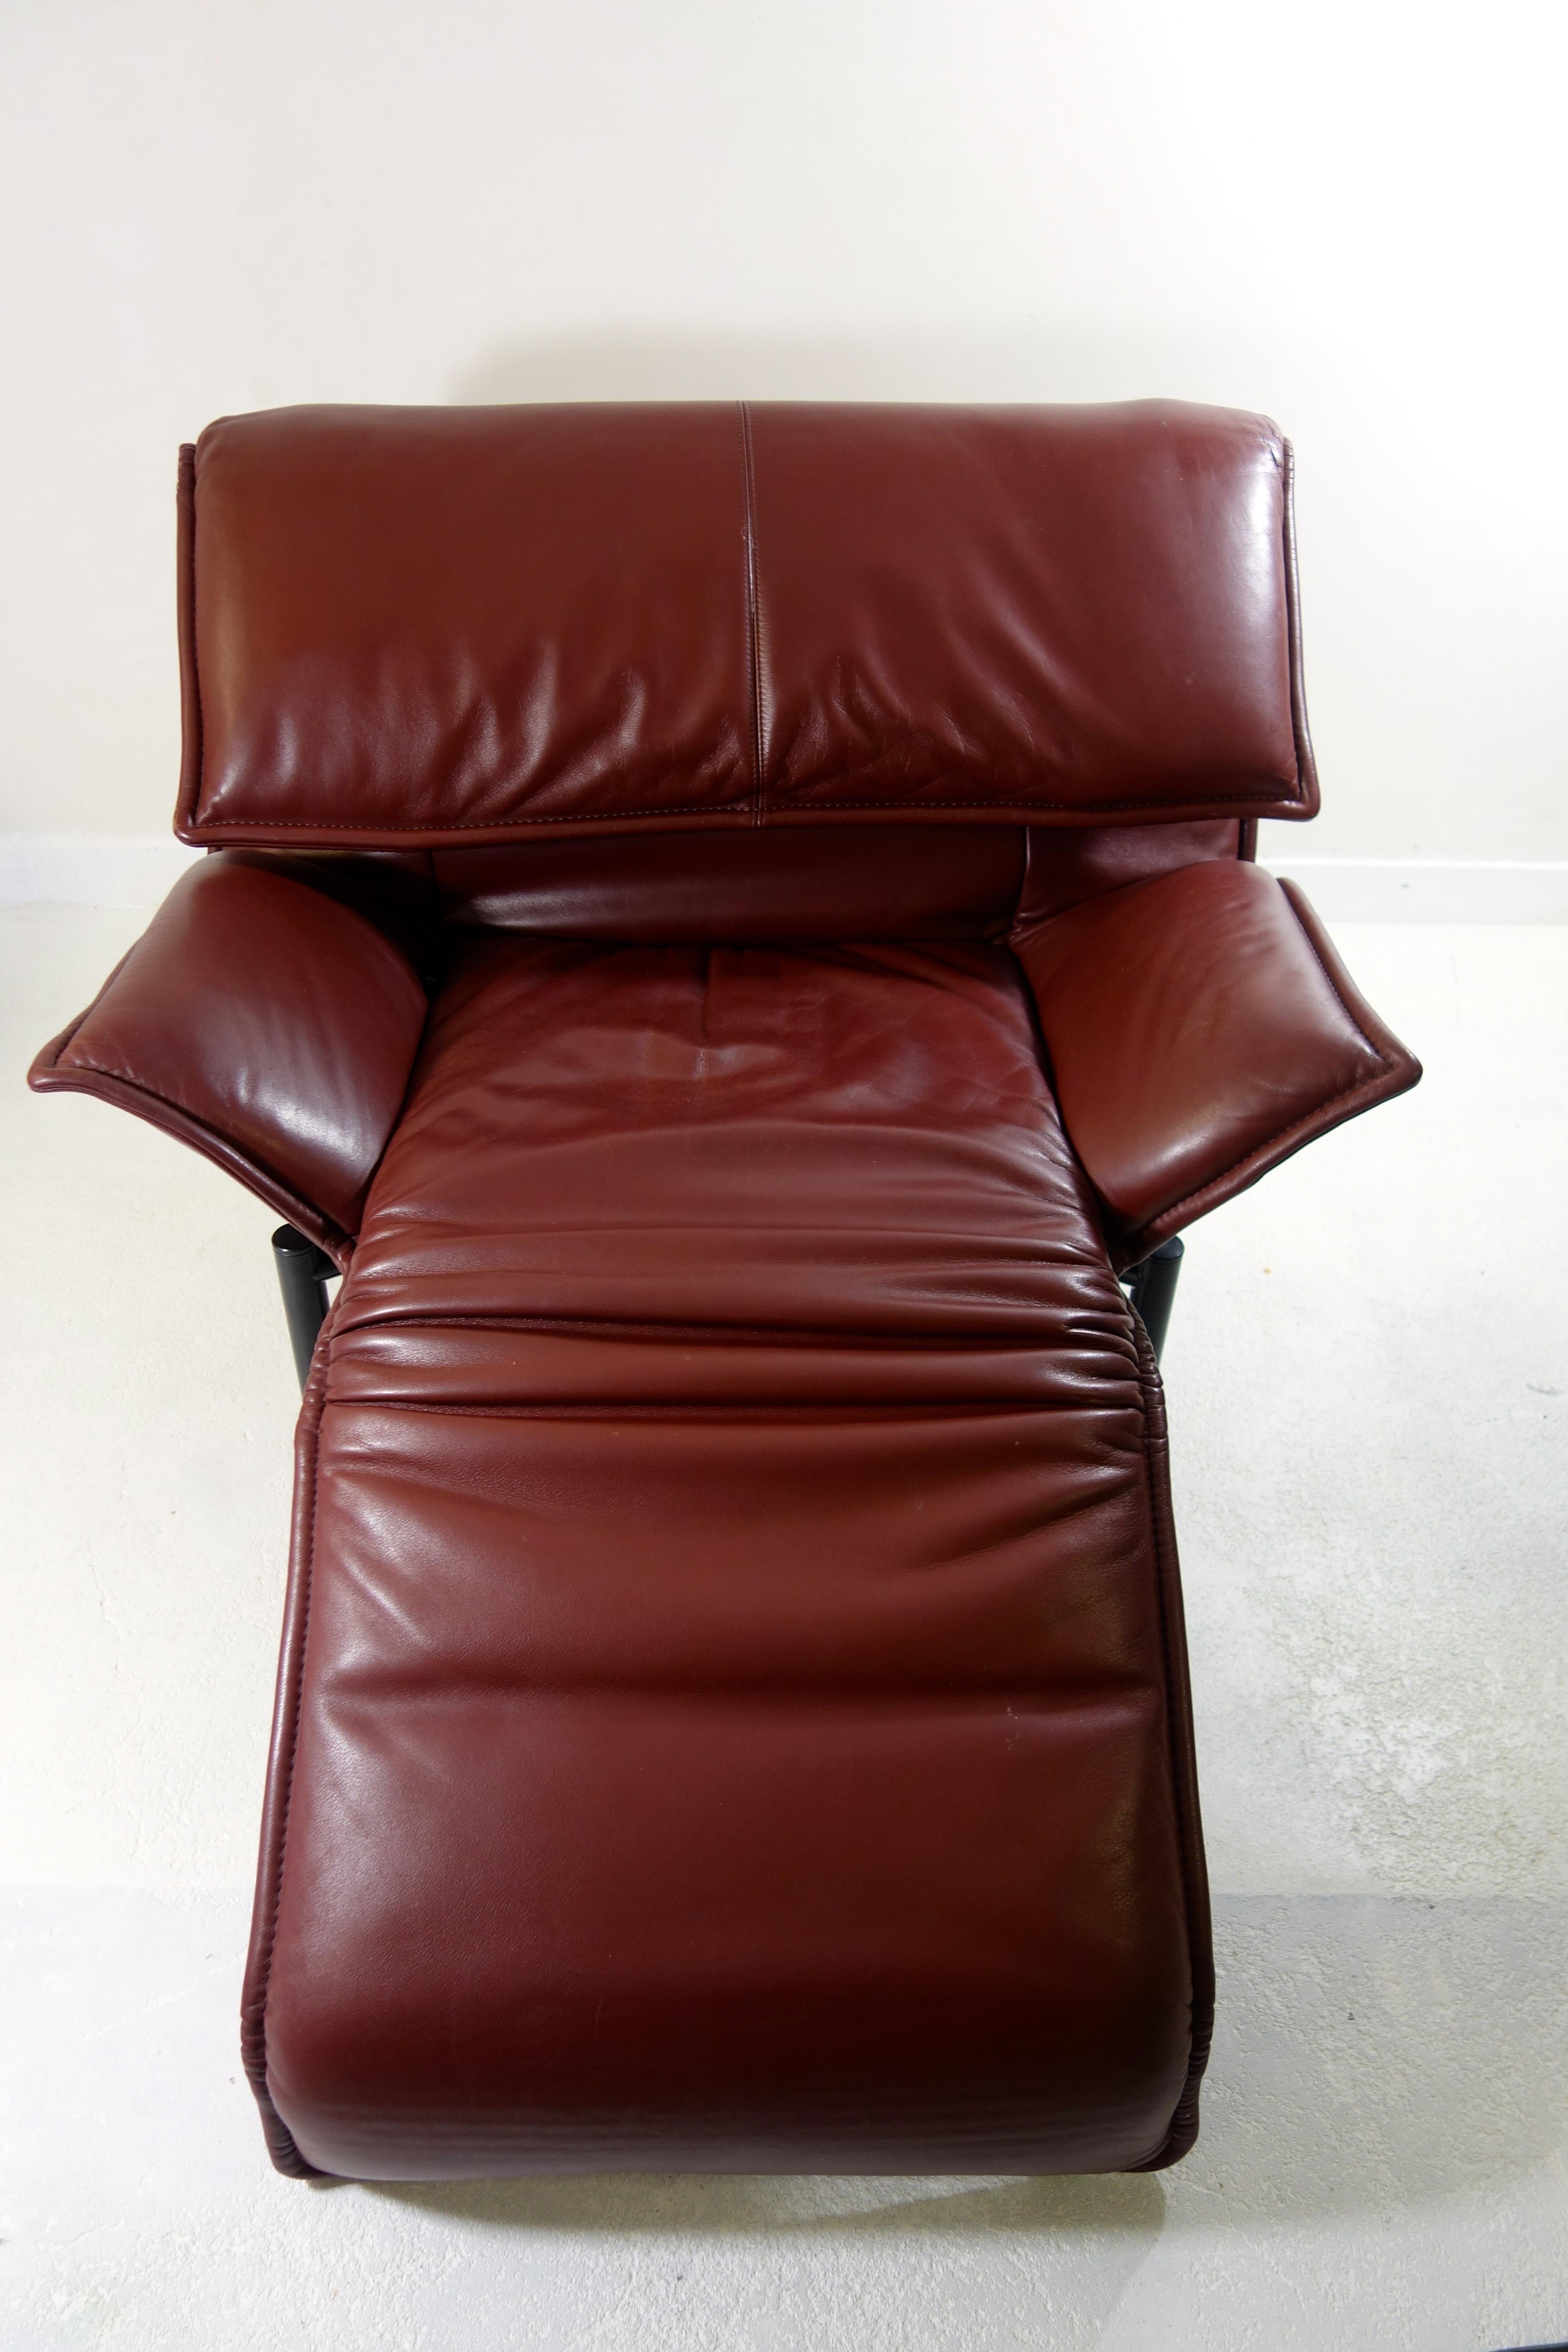 Veranda Lounge Chair by Vico Magistretti for Cassina in Brown Leather Reclining 1